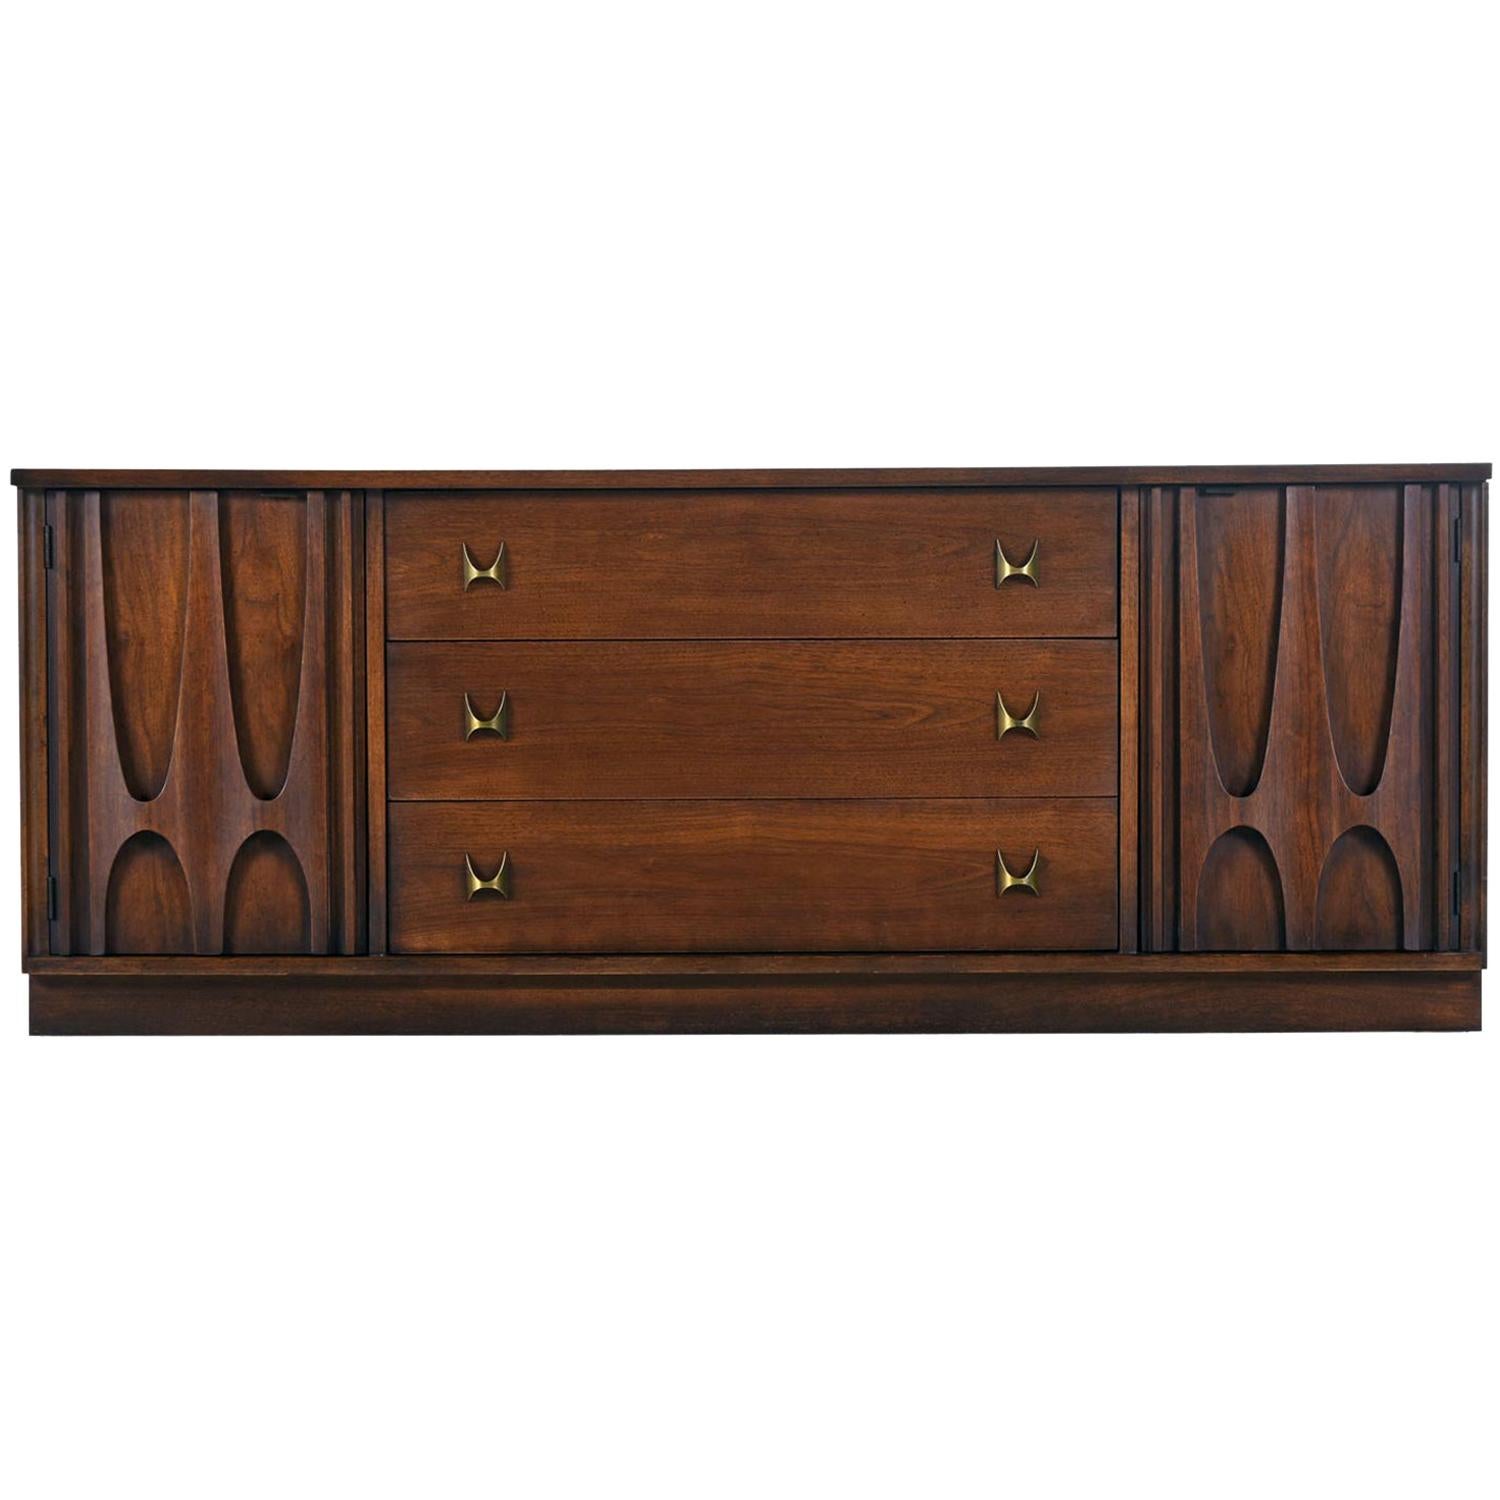 This credenza was delicately restored to preserve the original dark patina. We would find this sideboard often over the years, but Brasilia has elevated to a high-end status that has made them very sought after and subsequently harder to find. We